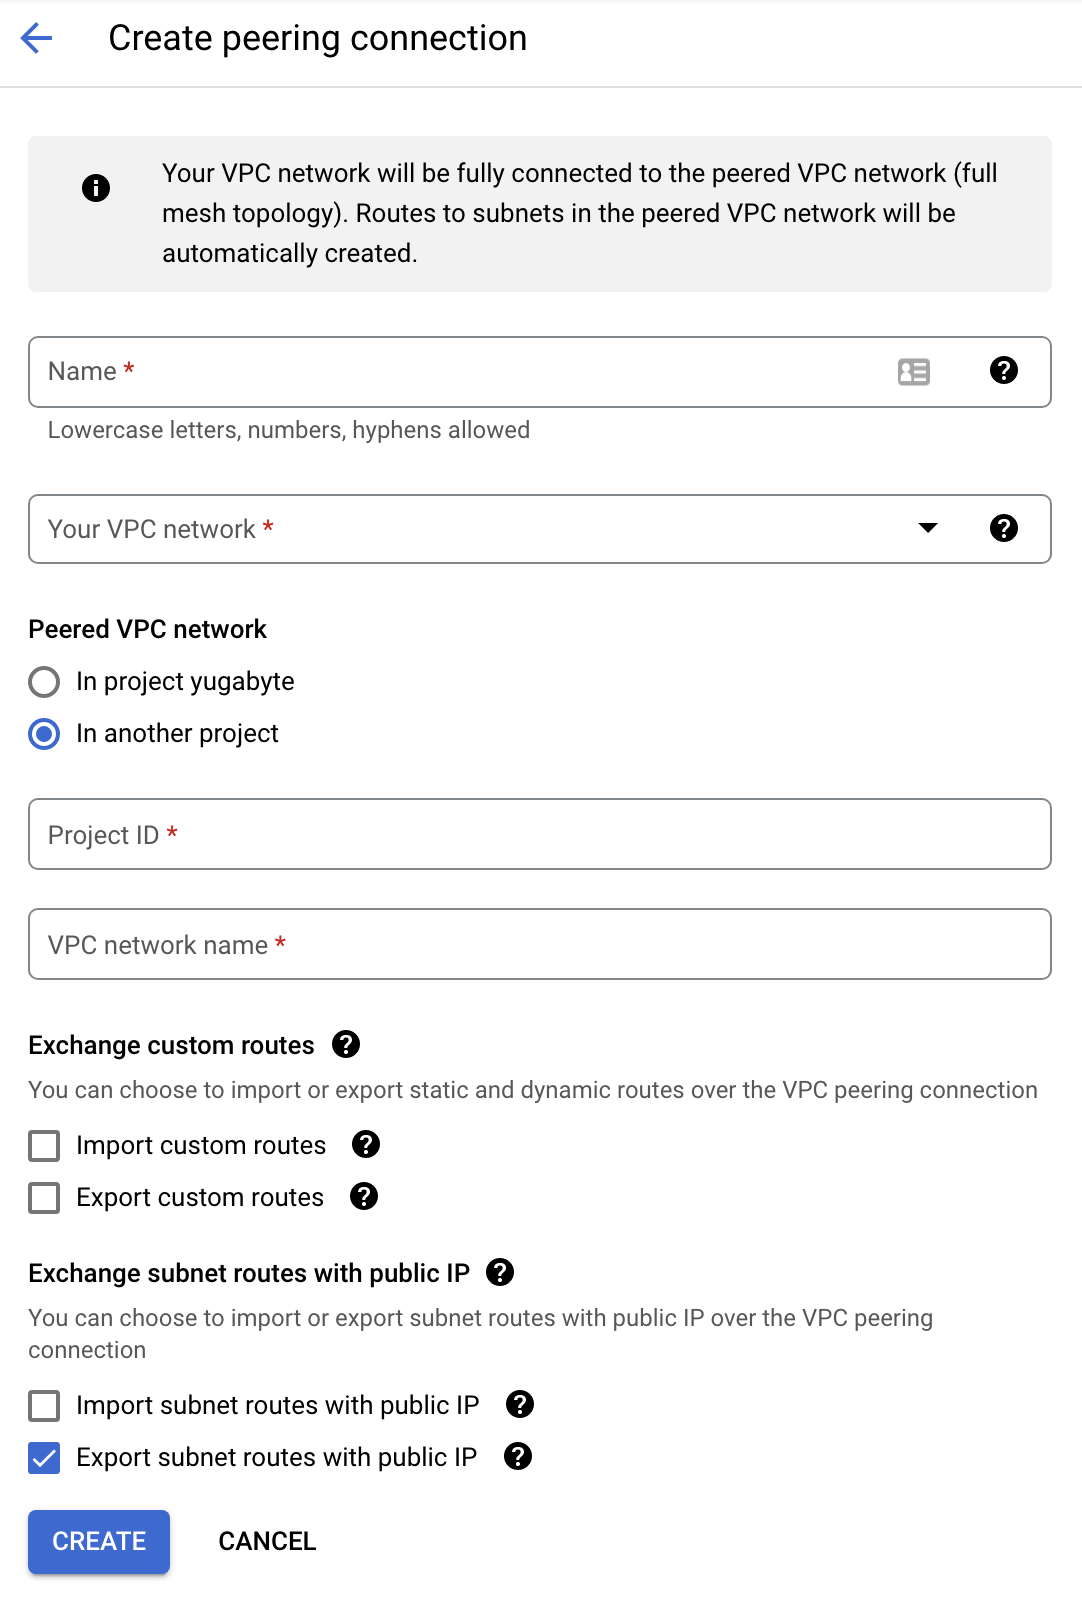 Create peering connection in GCP